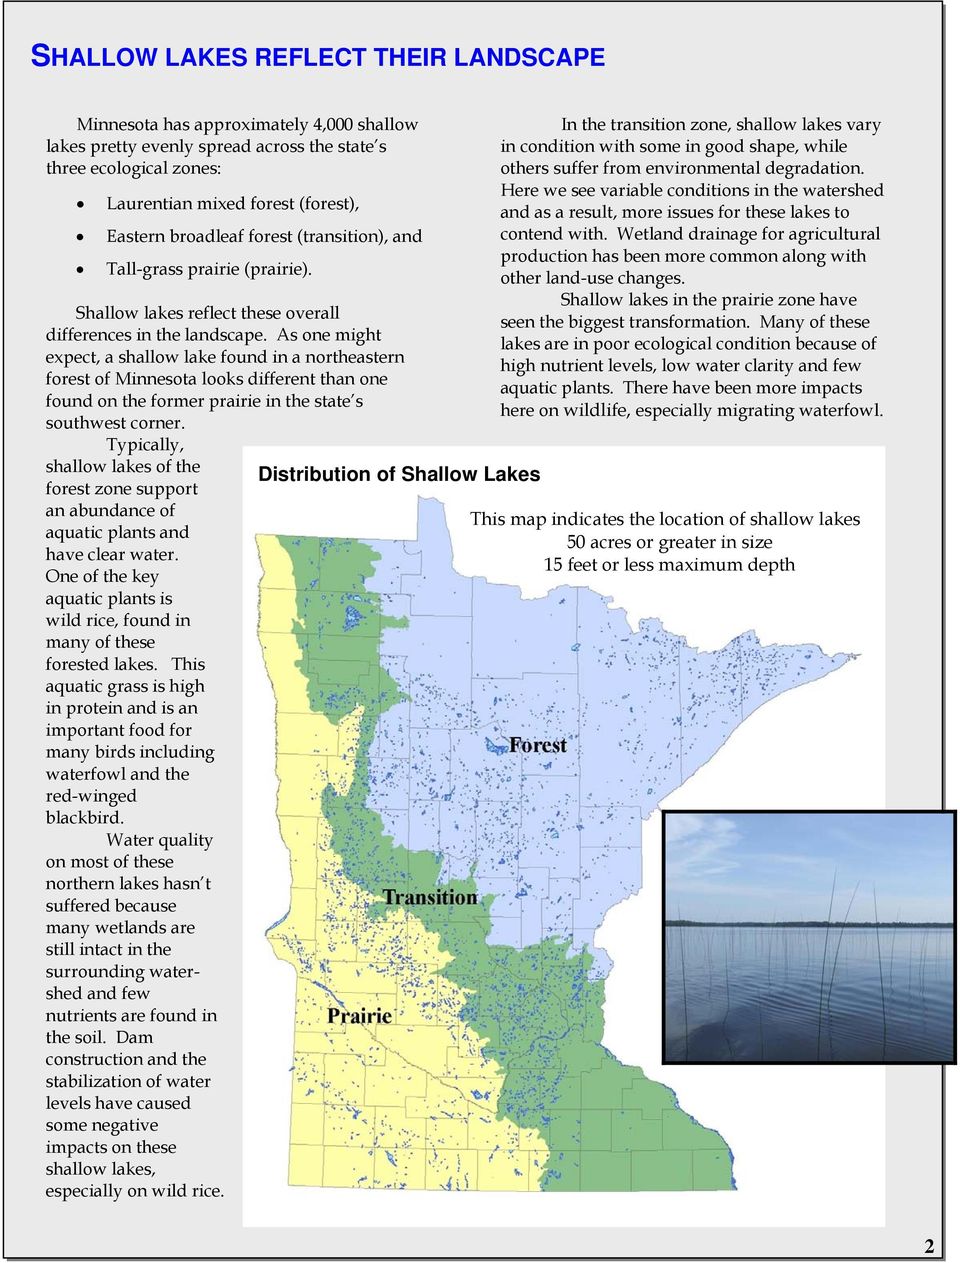 As one might expect, a shallow lake found in a northeastern forest of Minnesota looks different than one found on the former prairie in the state s southwest corner.